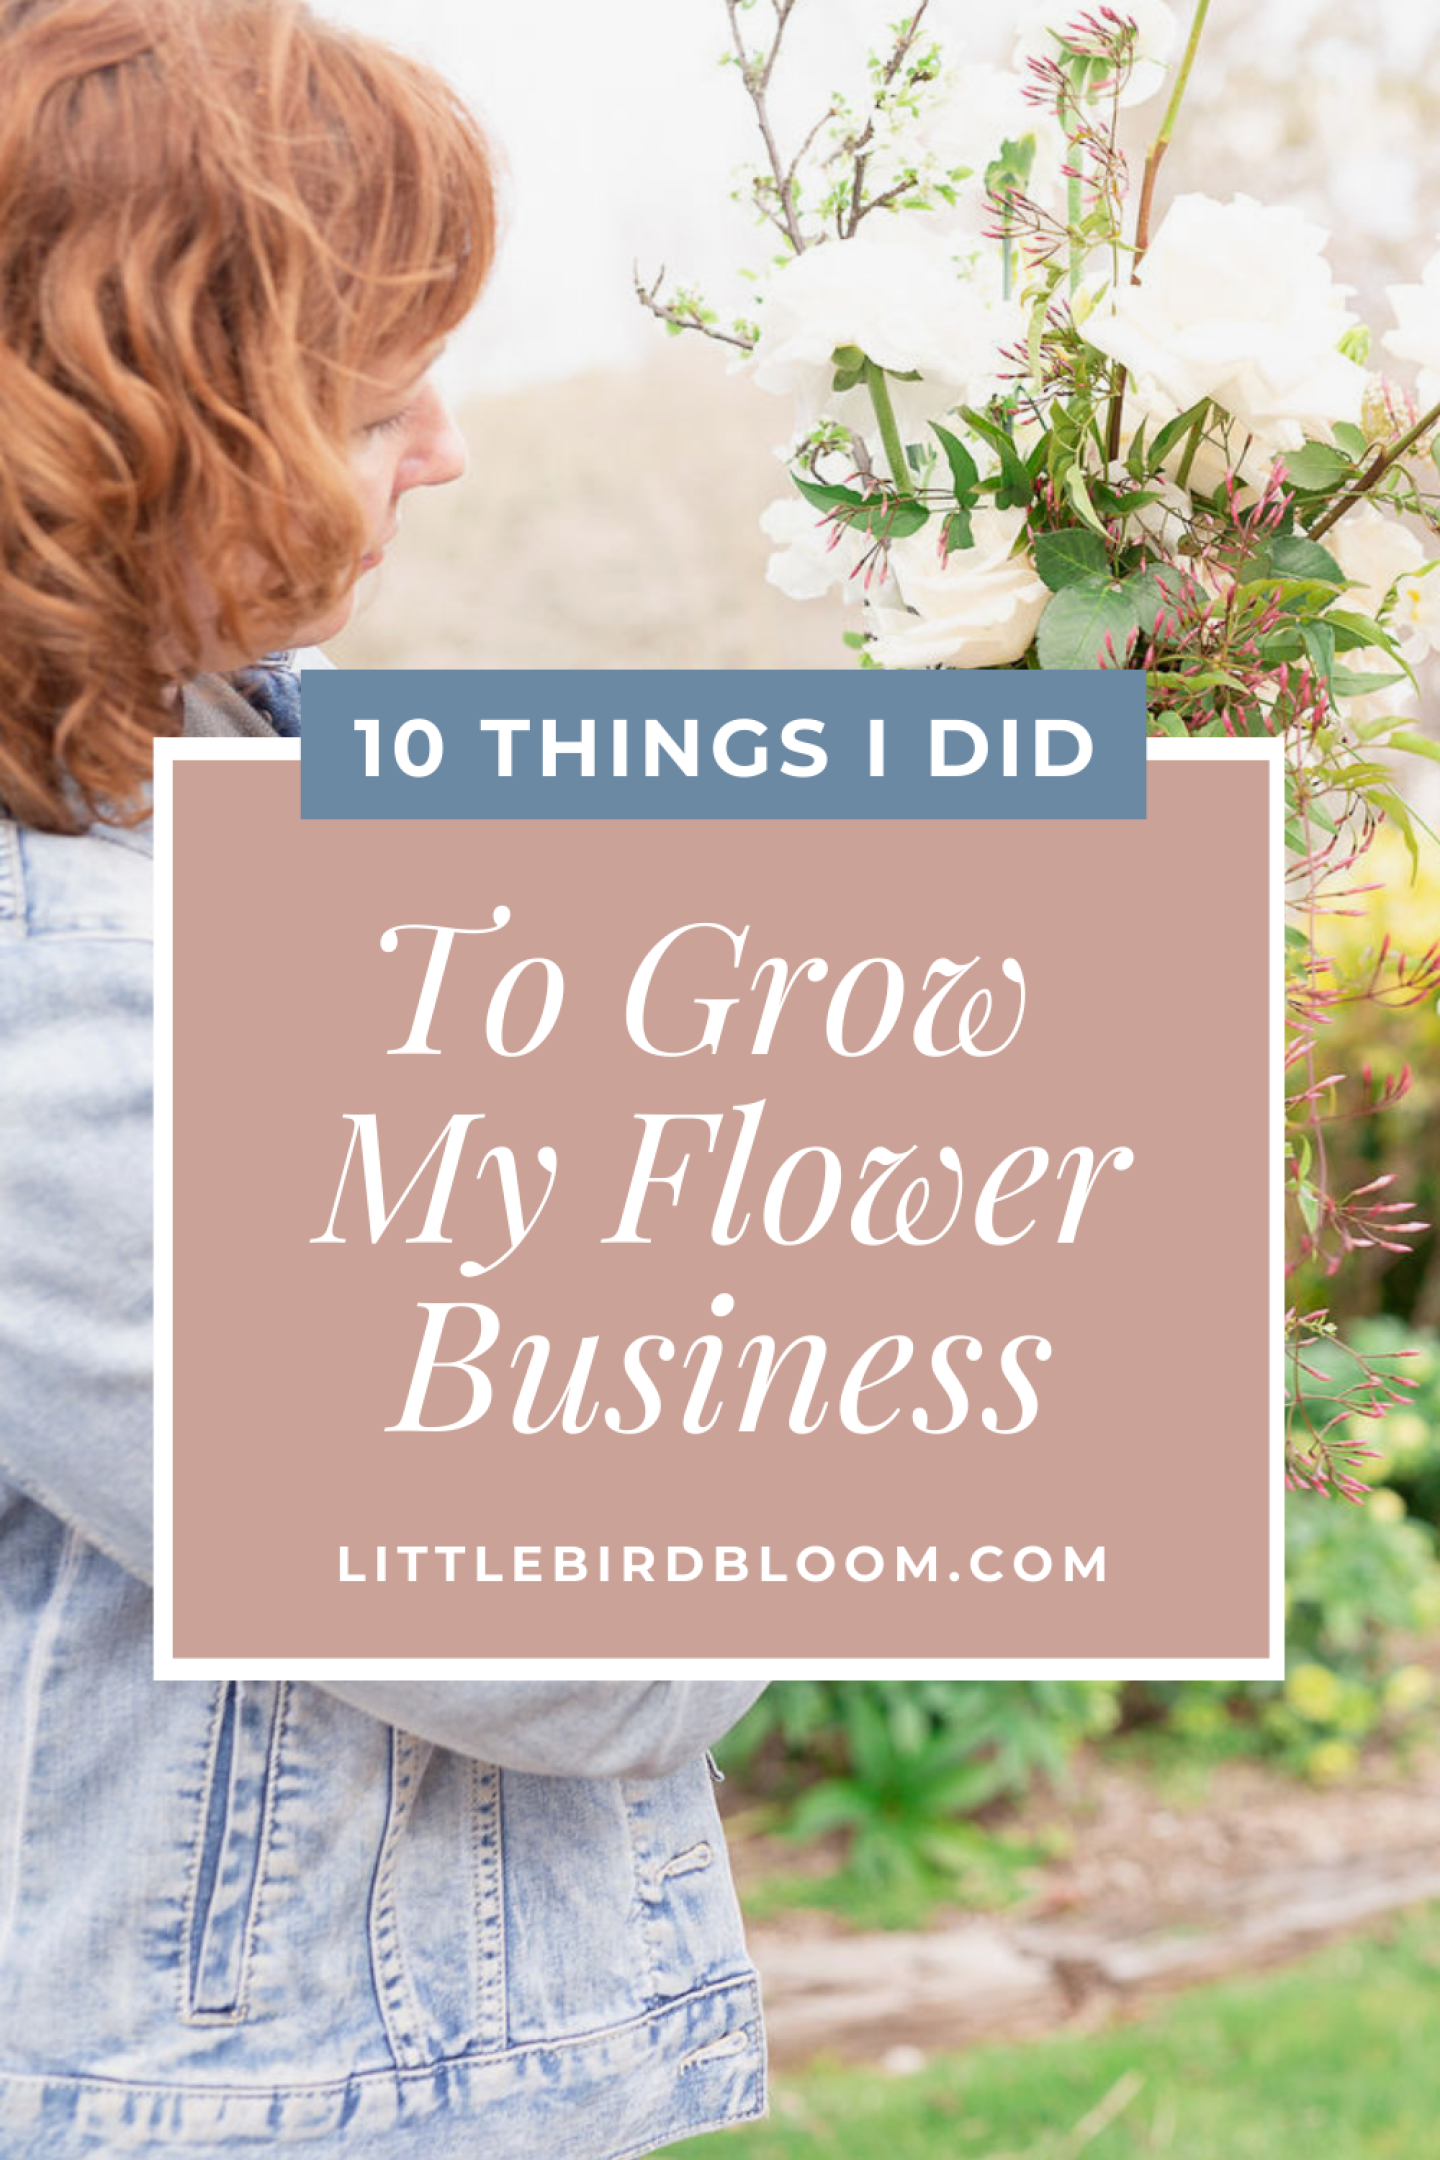 10 Things I Did to Grow My Flower Business